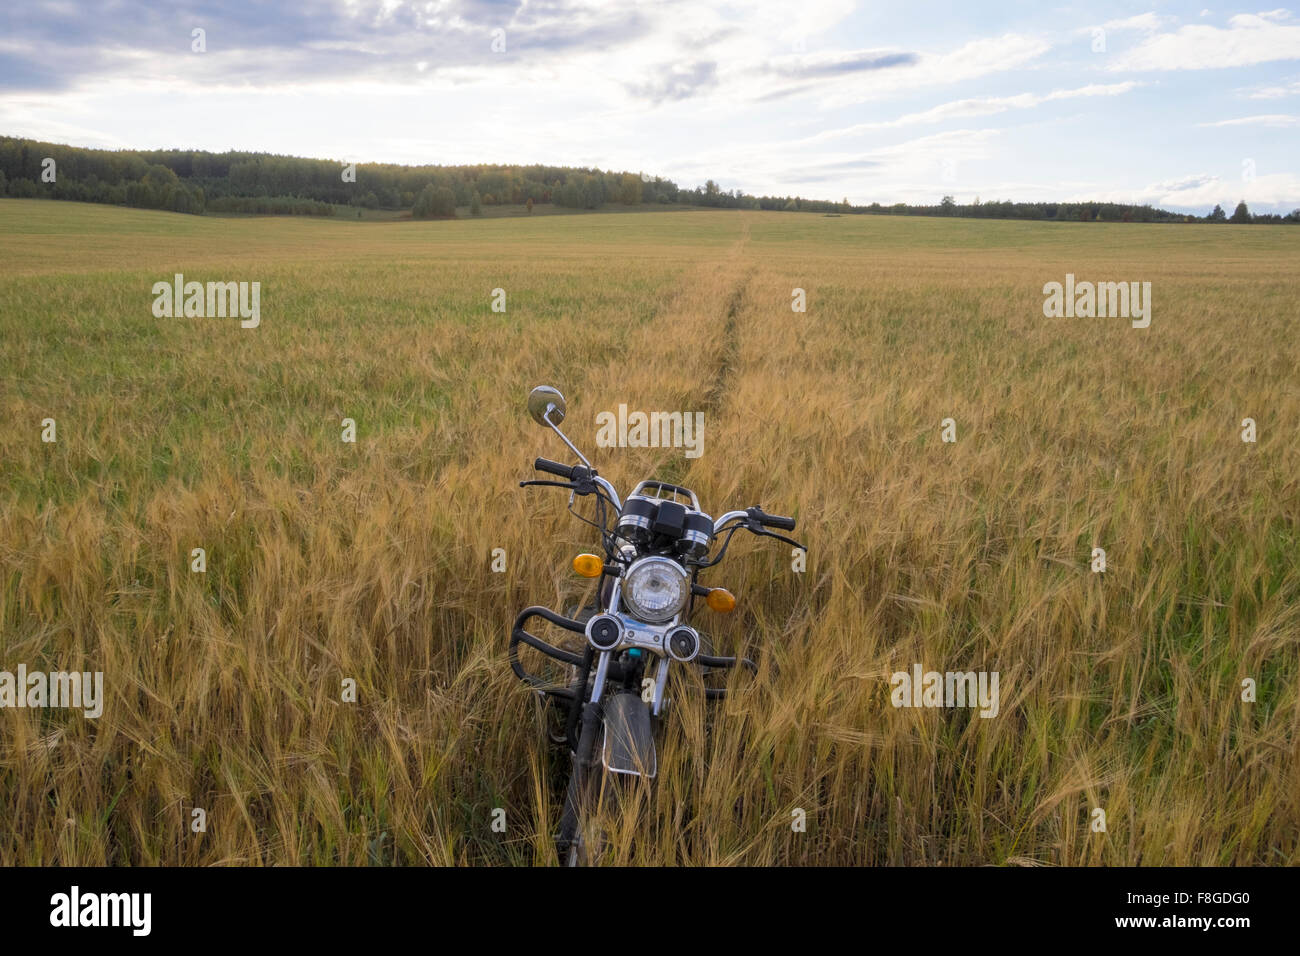 Motorcycle parked in tall grass Stock Photo